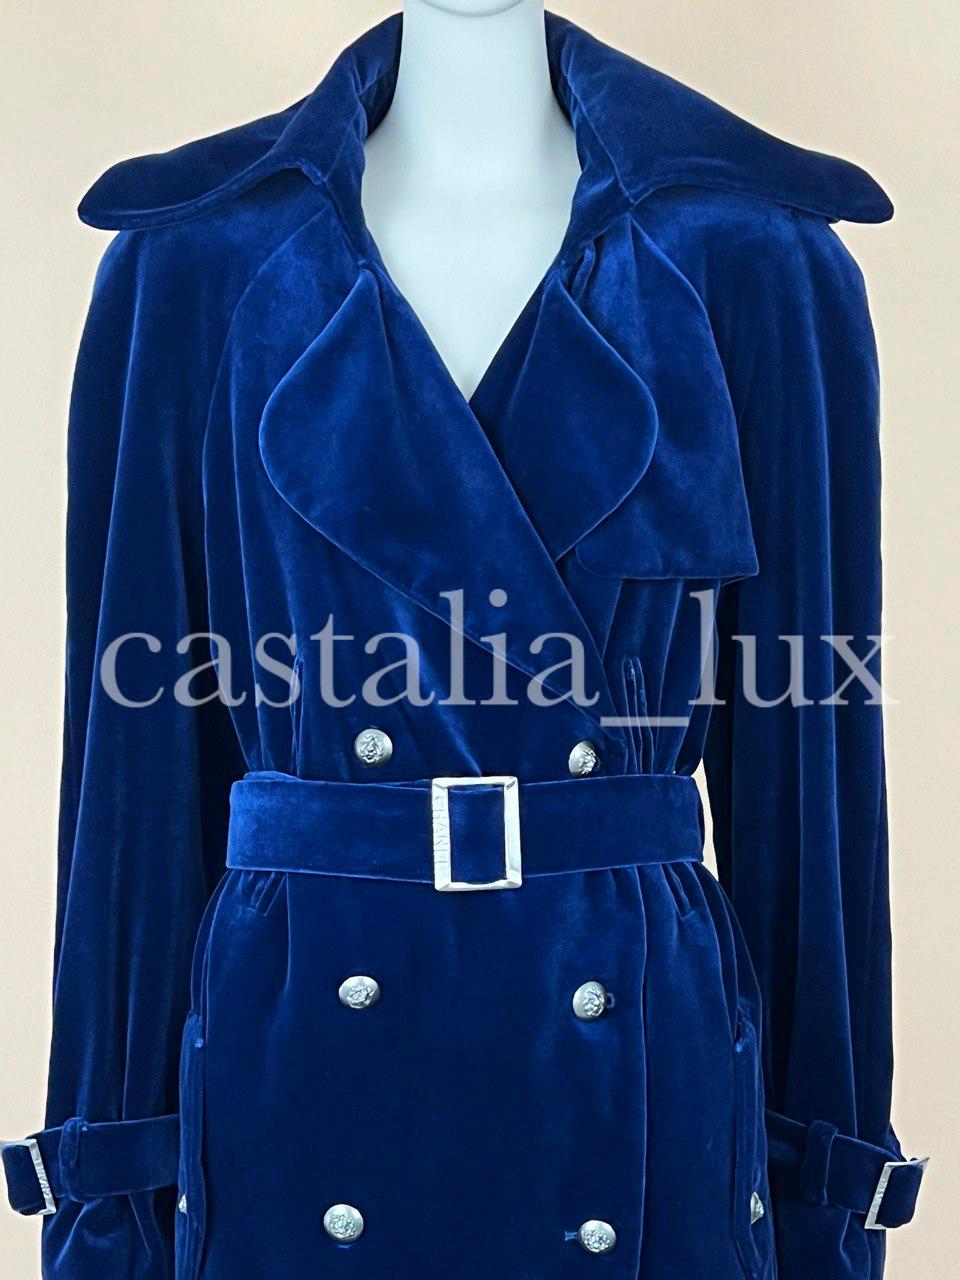 Very rare Chanel trench coat in i royal blue velvet. 
- CC logo buttons with lionheads
- Full silk lining
- waist belt, buckles with brand's name at belt and at cuffs
-  buttoned epaulettes. 
Size mark 44 fr. Never has been worn, 